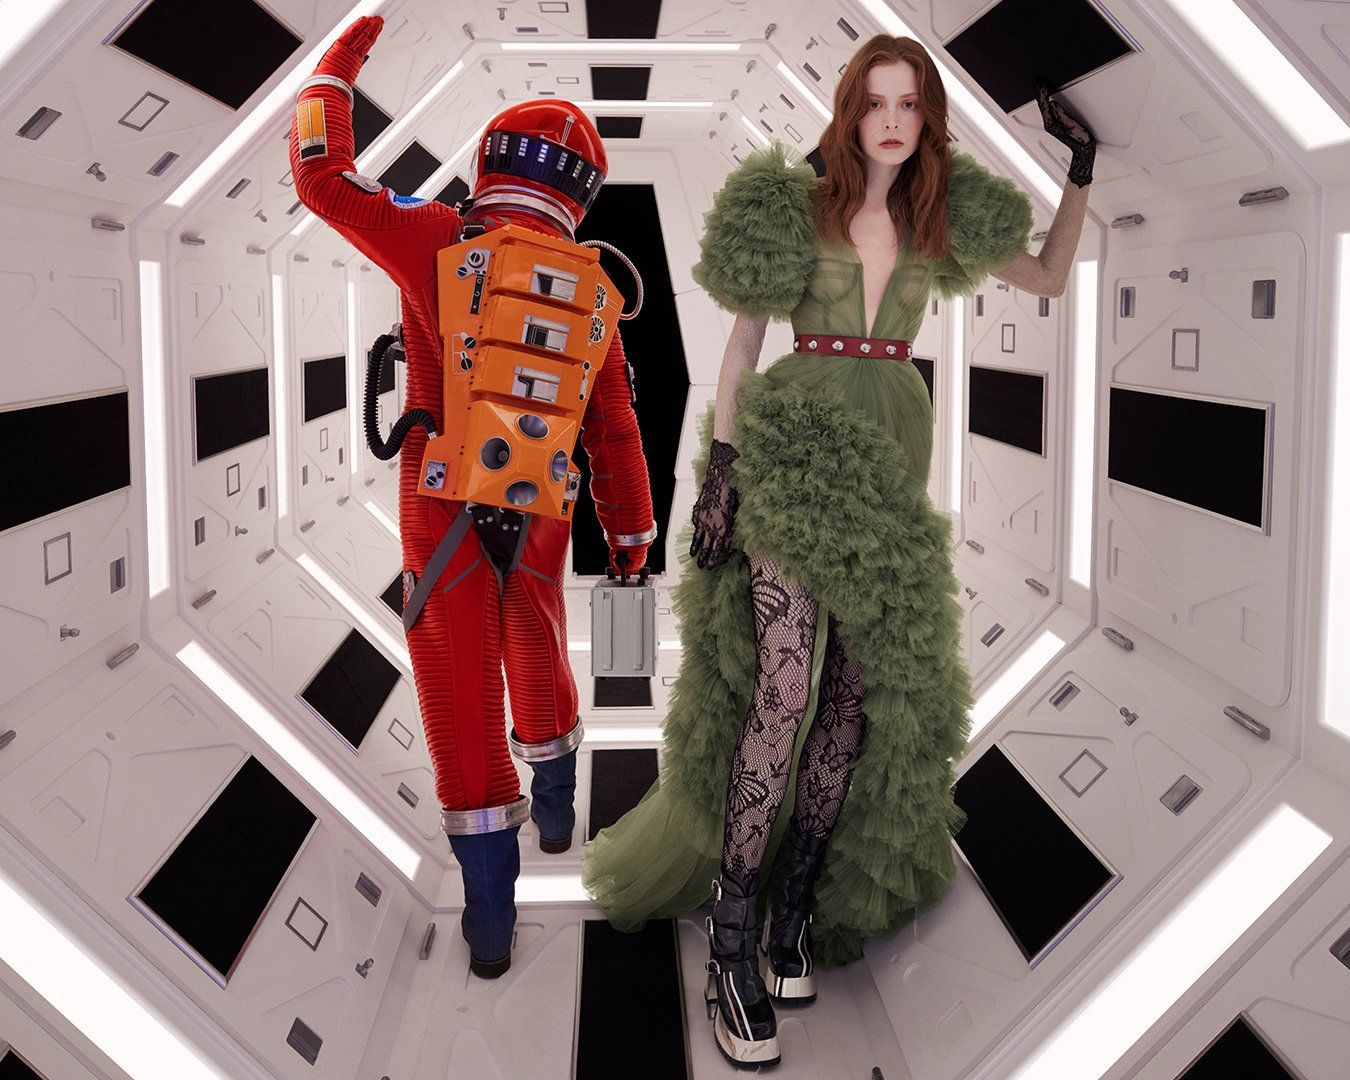 Recreating 2001 A Space Odyssey in the new Gucci Exquisite campaign